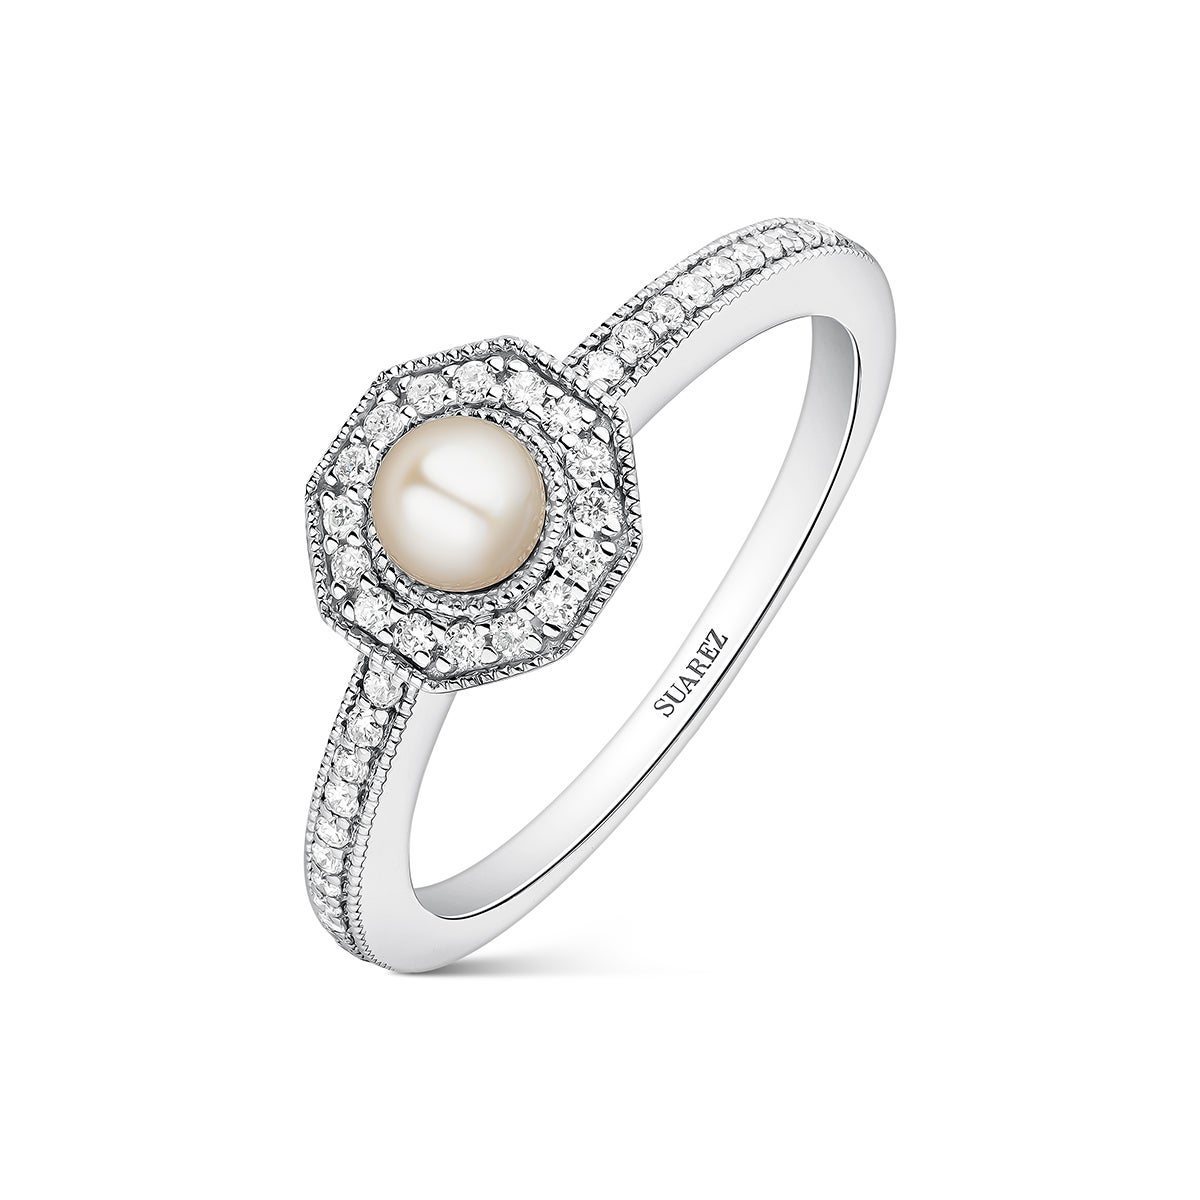 18K white gold ring with Australian pearl and 40 brilliant-cut diamonds with a total of 0.14 cts